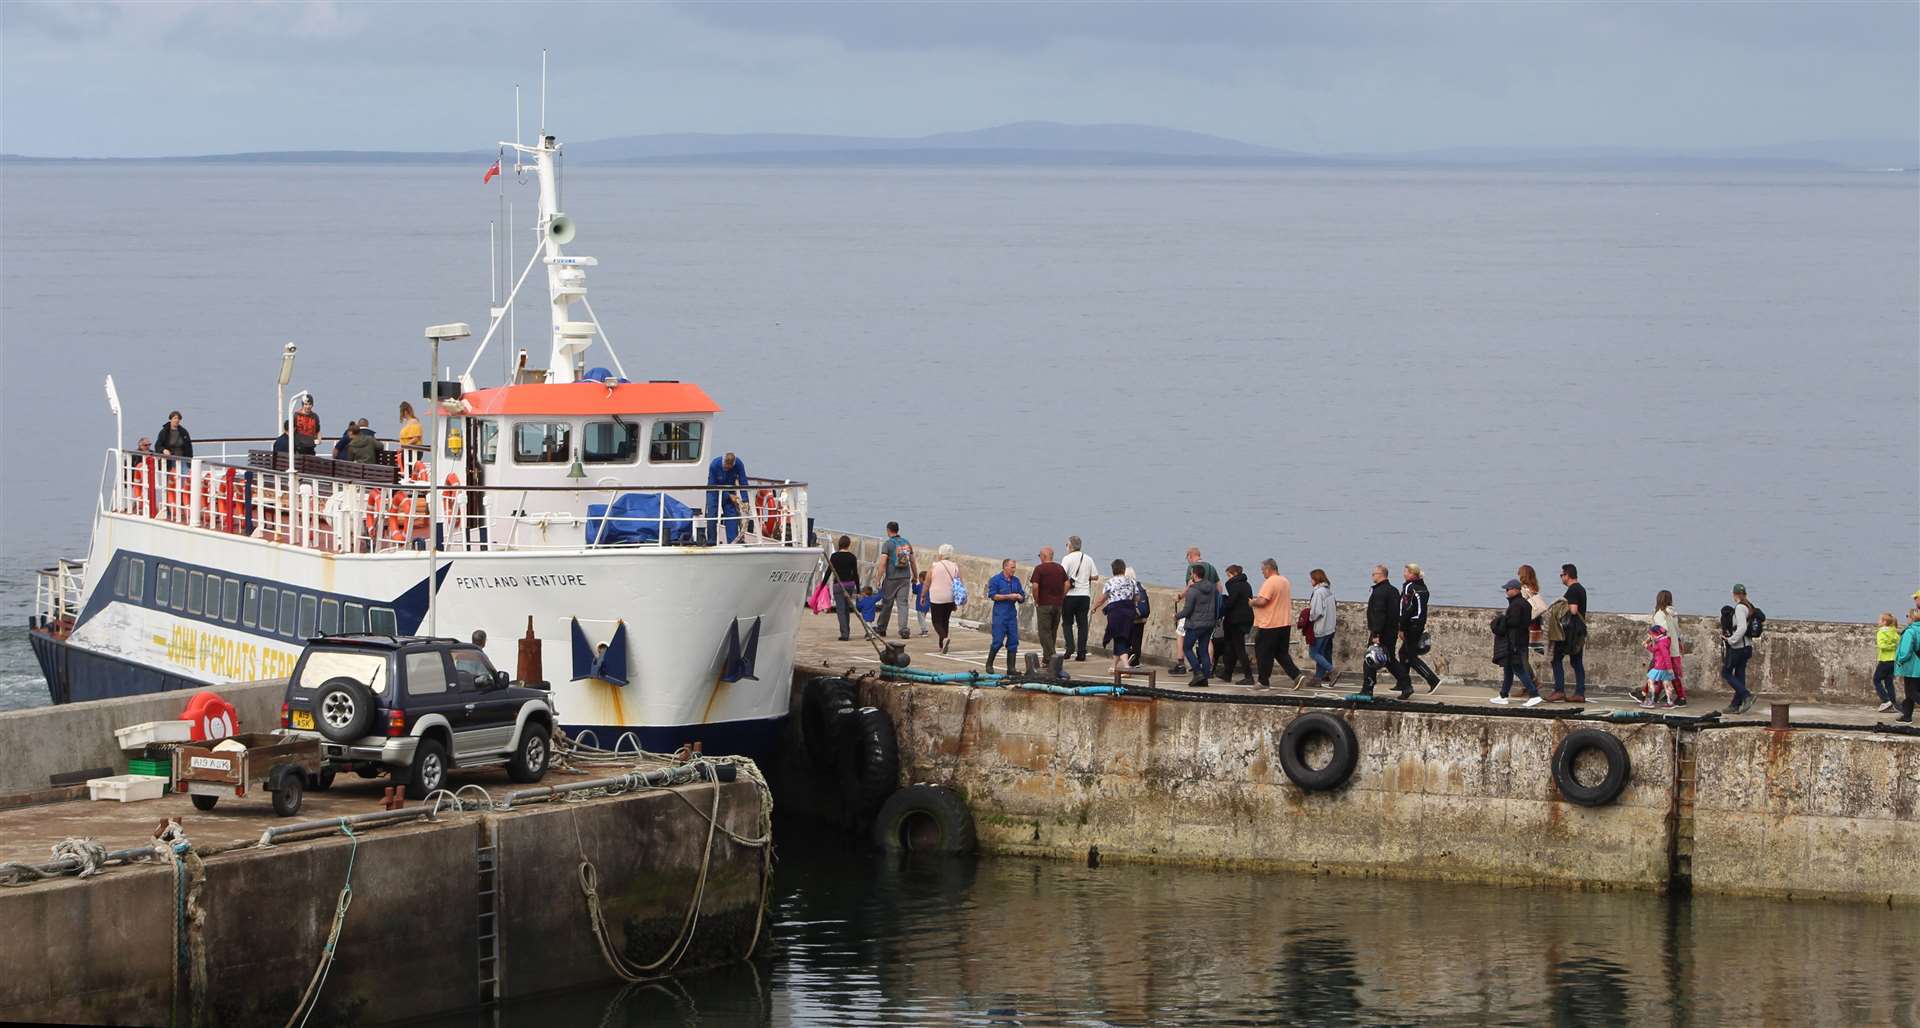 Passengers making their way onto the Pentland Venture at John O'Groats harbour in August 2018.